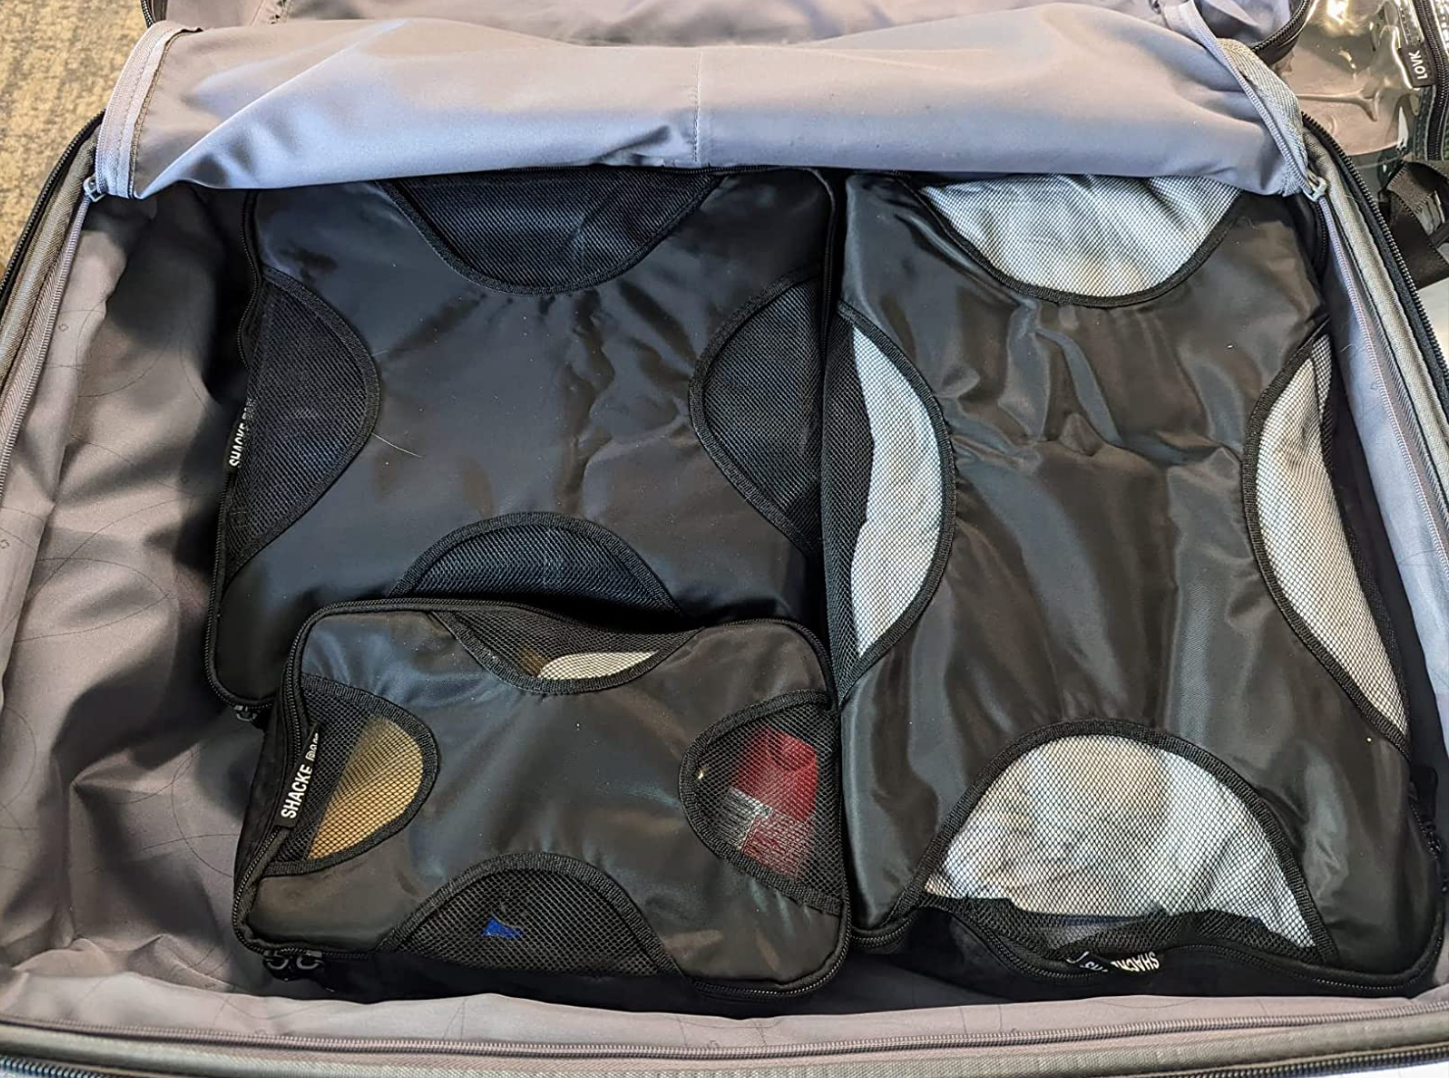 A suitcase divided with clothes in three differently-sized mesh black packing cubes 